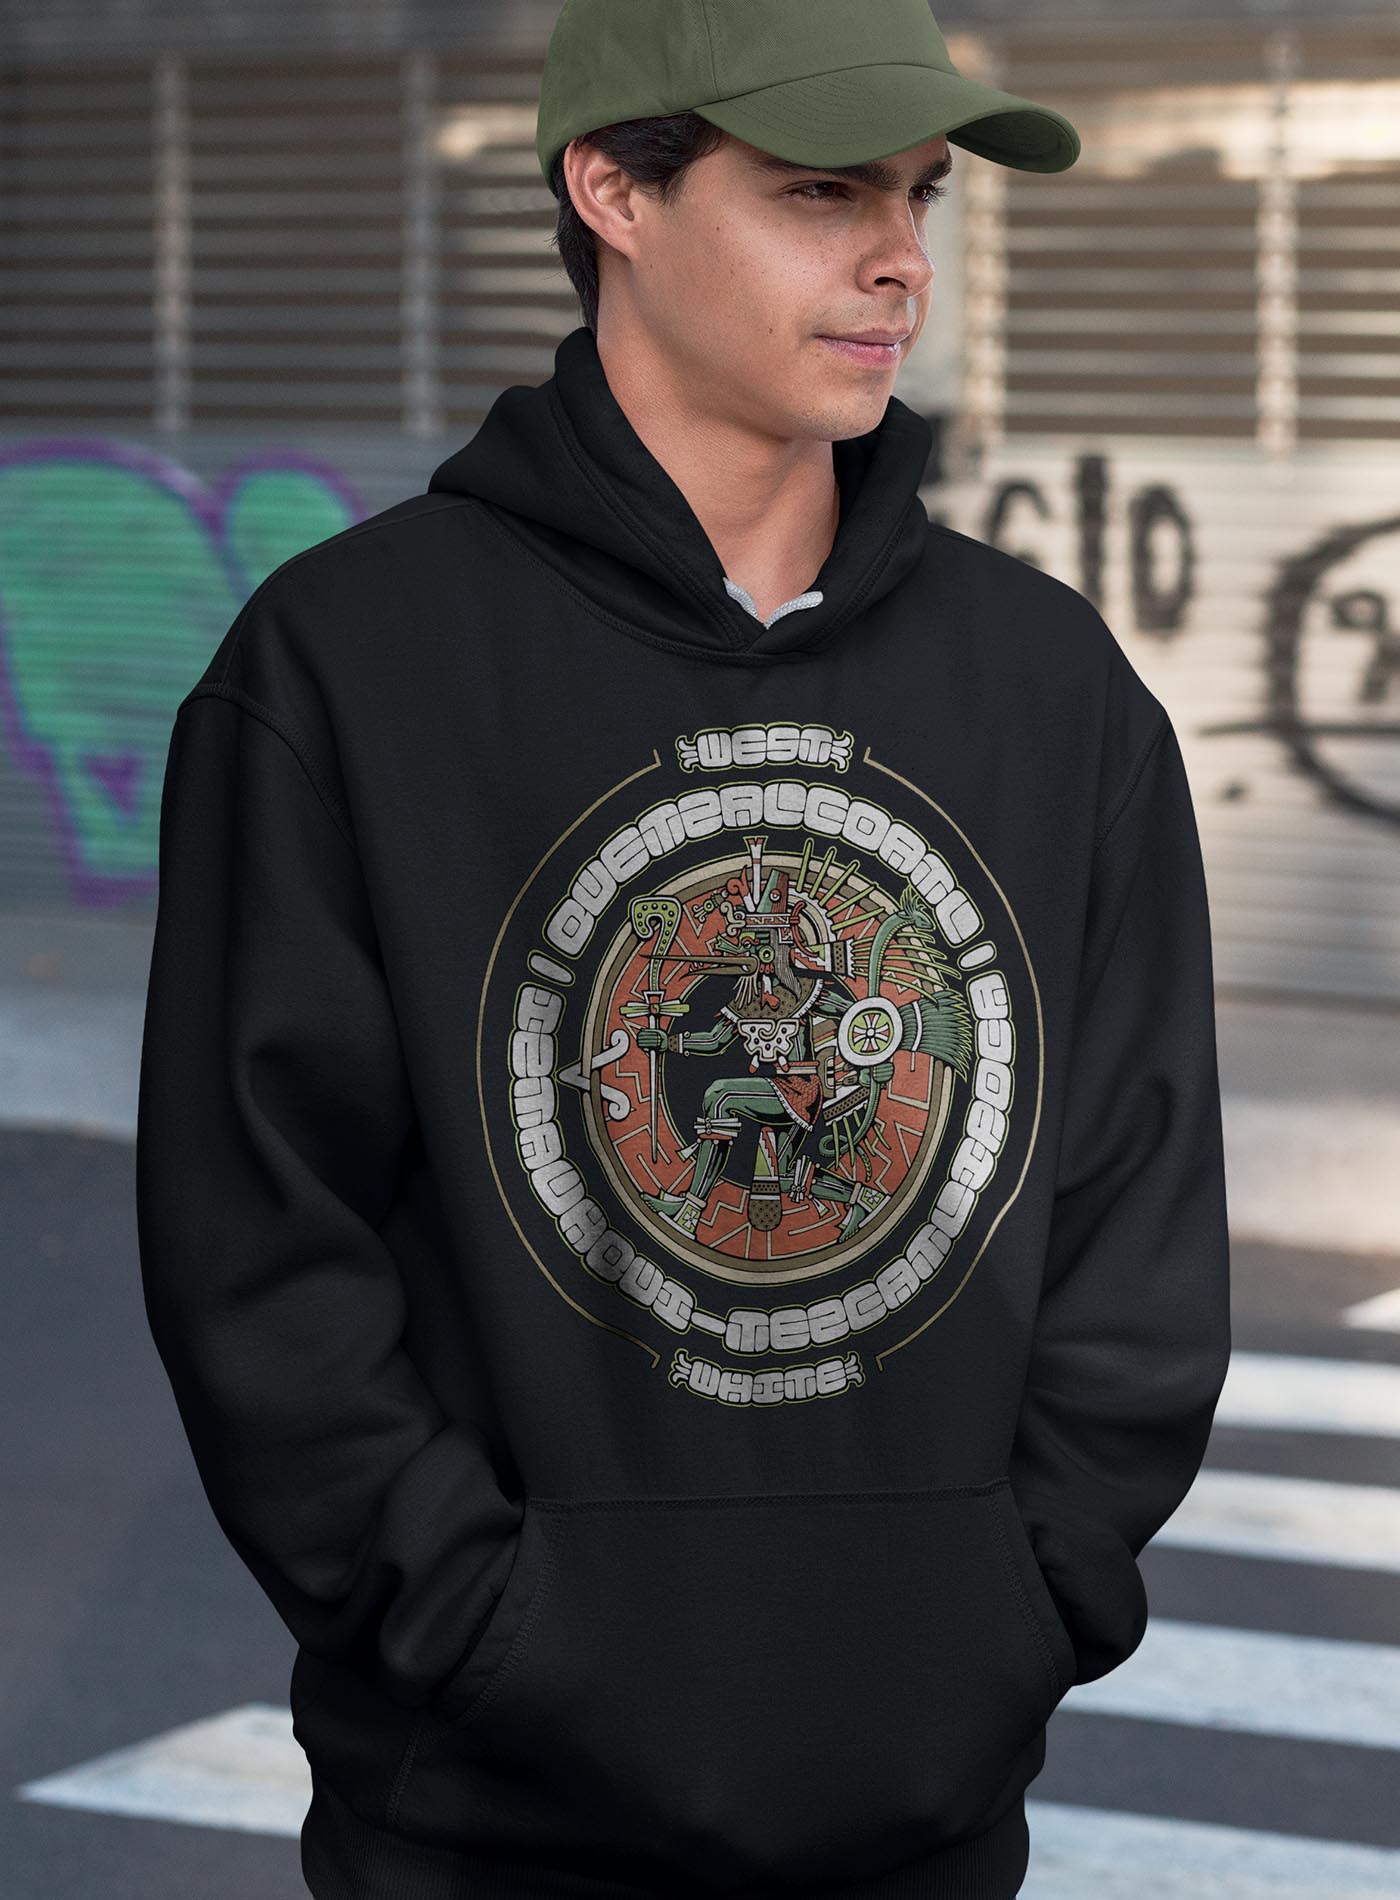 man modeling a black unisex hoodie featuring a front print of the toltec-aztec god Tezcatlipoca also known as Quetzalcoatl. Reinterpretation by Mexican illustrator G.M. Meave.